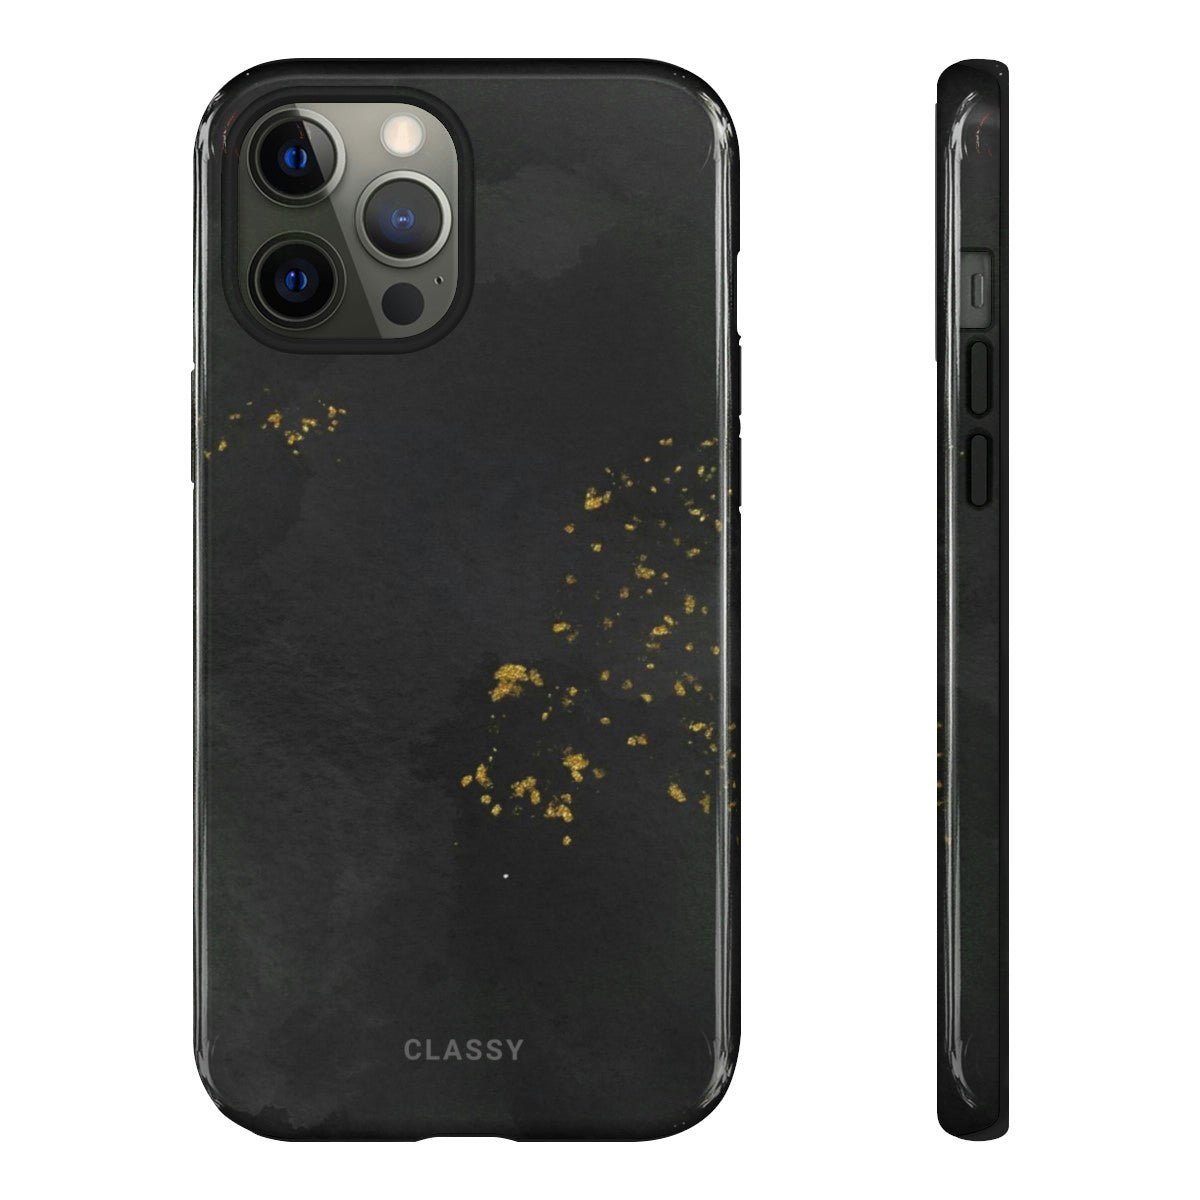 Black and Gold Tough Case with Sprinkles - Classy Cases - Phone Case - iPhone 12 Pro Max - Glossy -